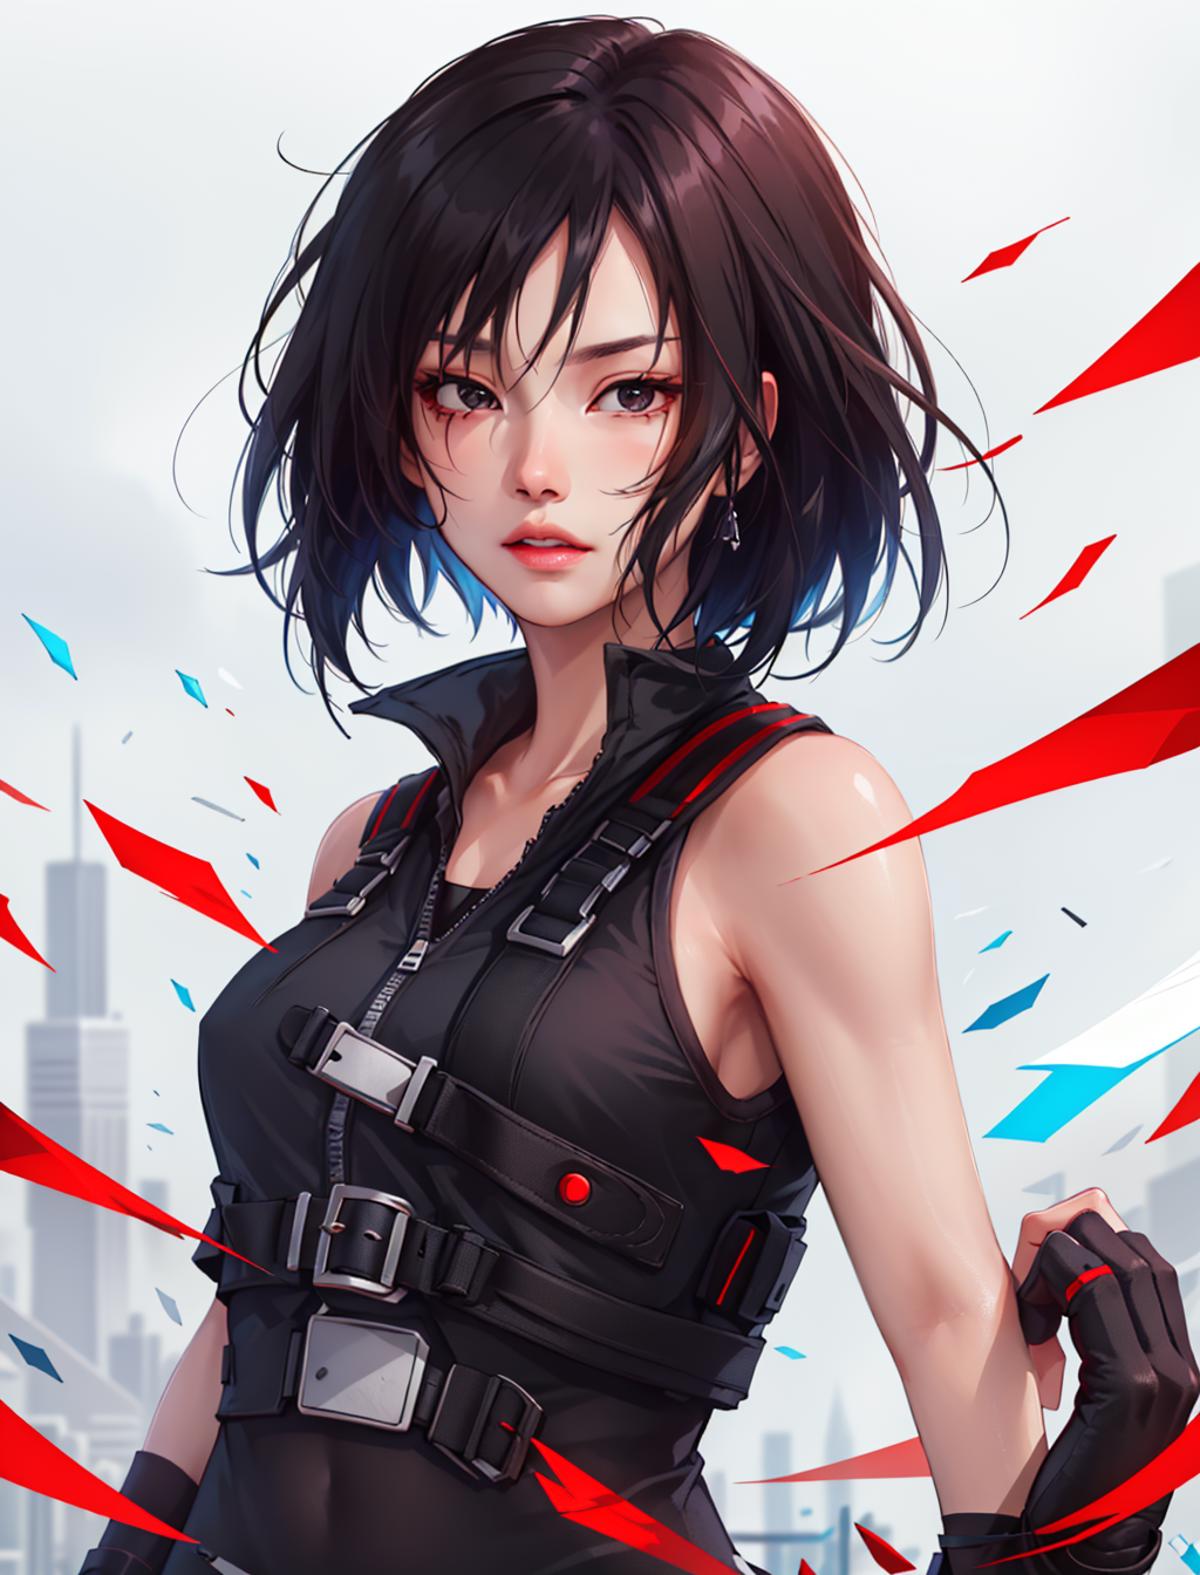 Faith from Mirror's Edge image by Zileans